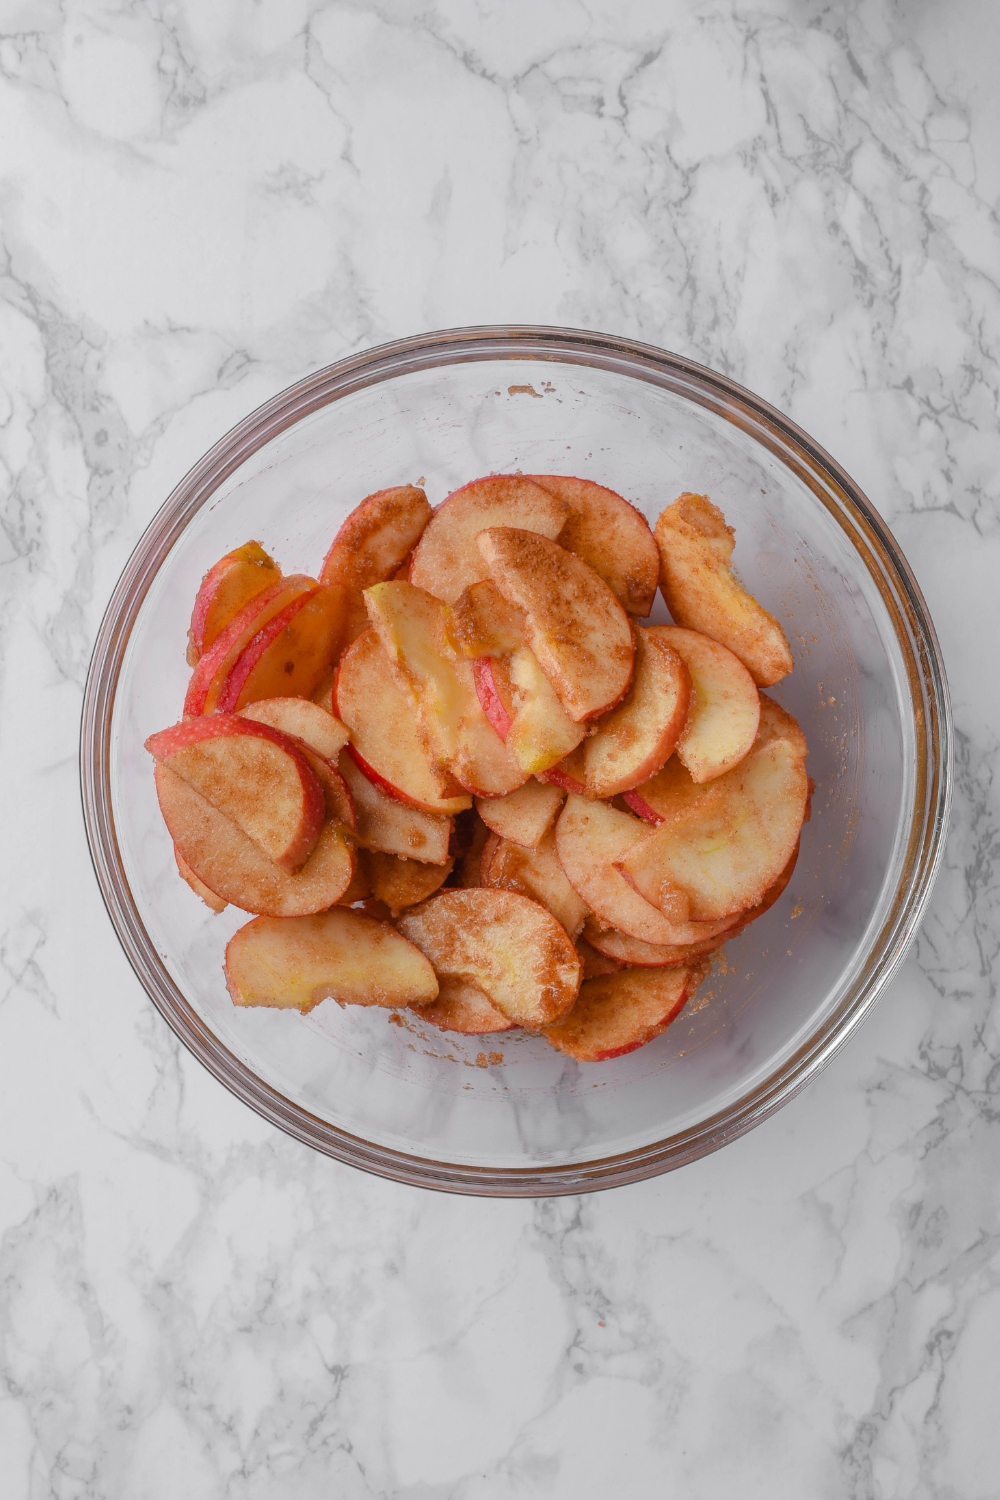 Sliced apples coated in cinnamon sugar in a glass bowl on a grey counter.